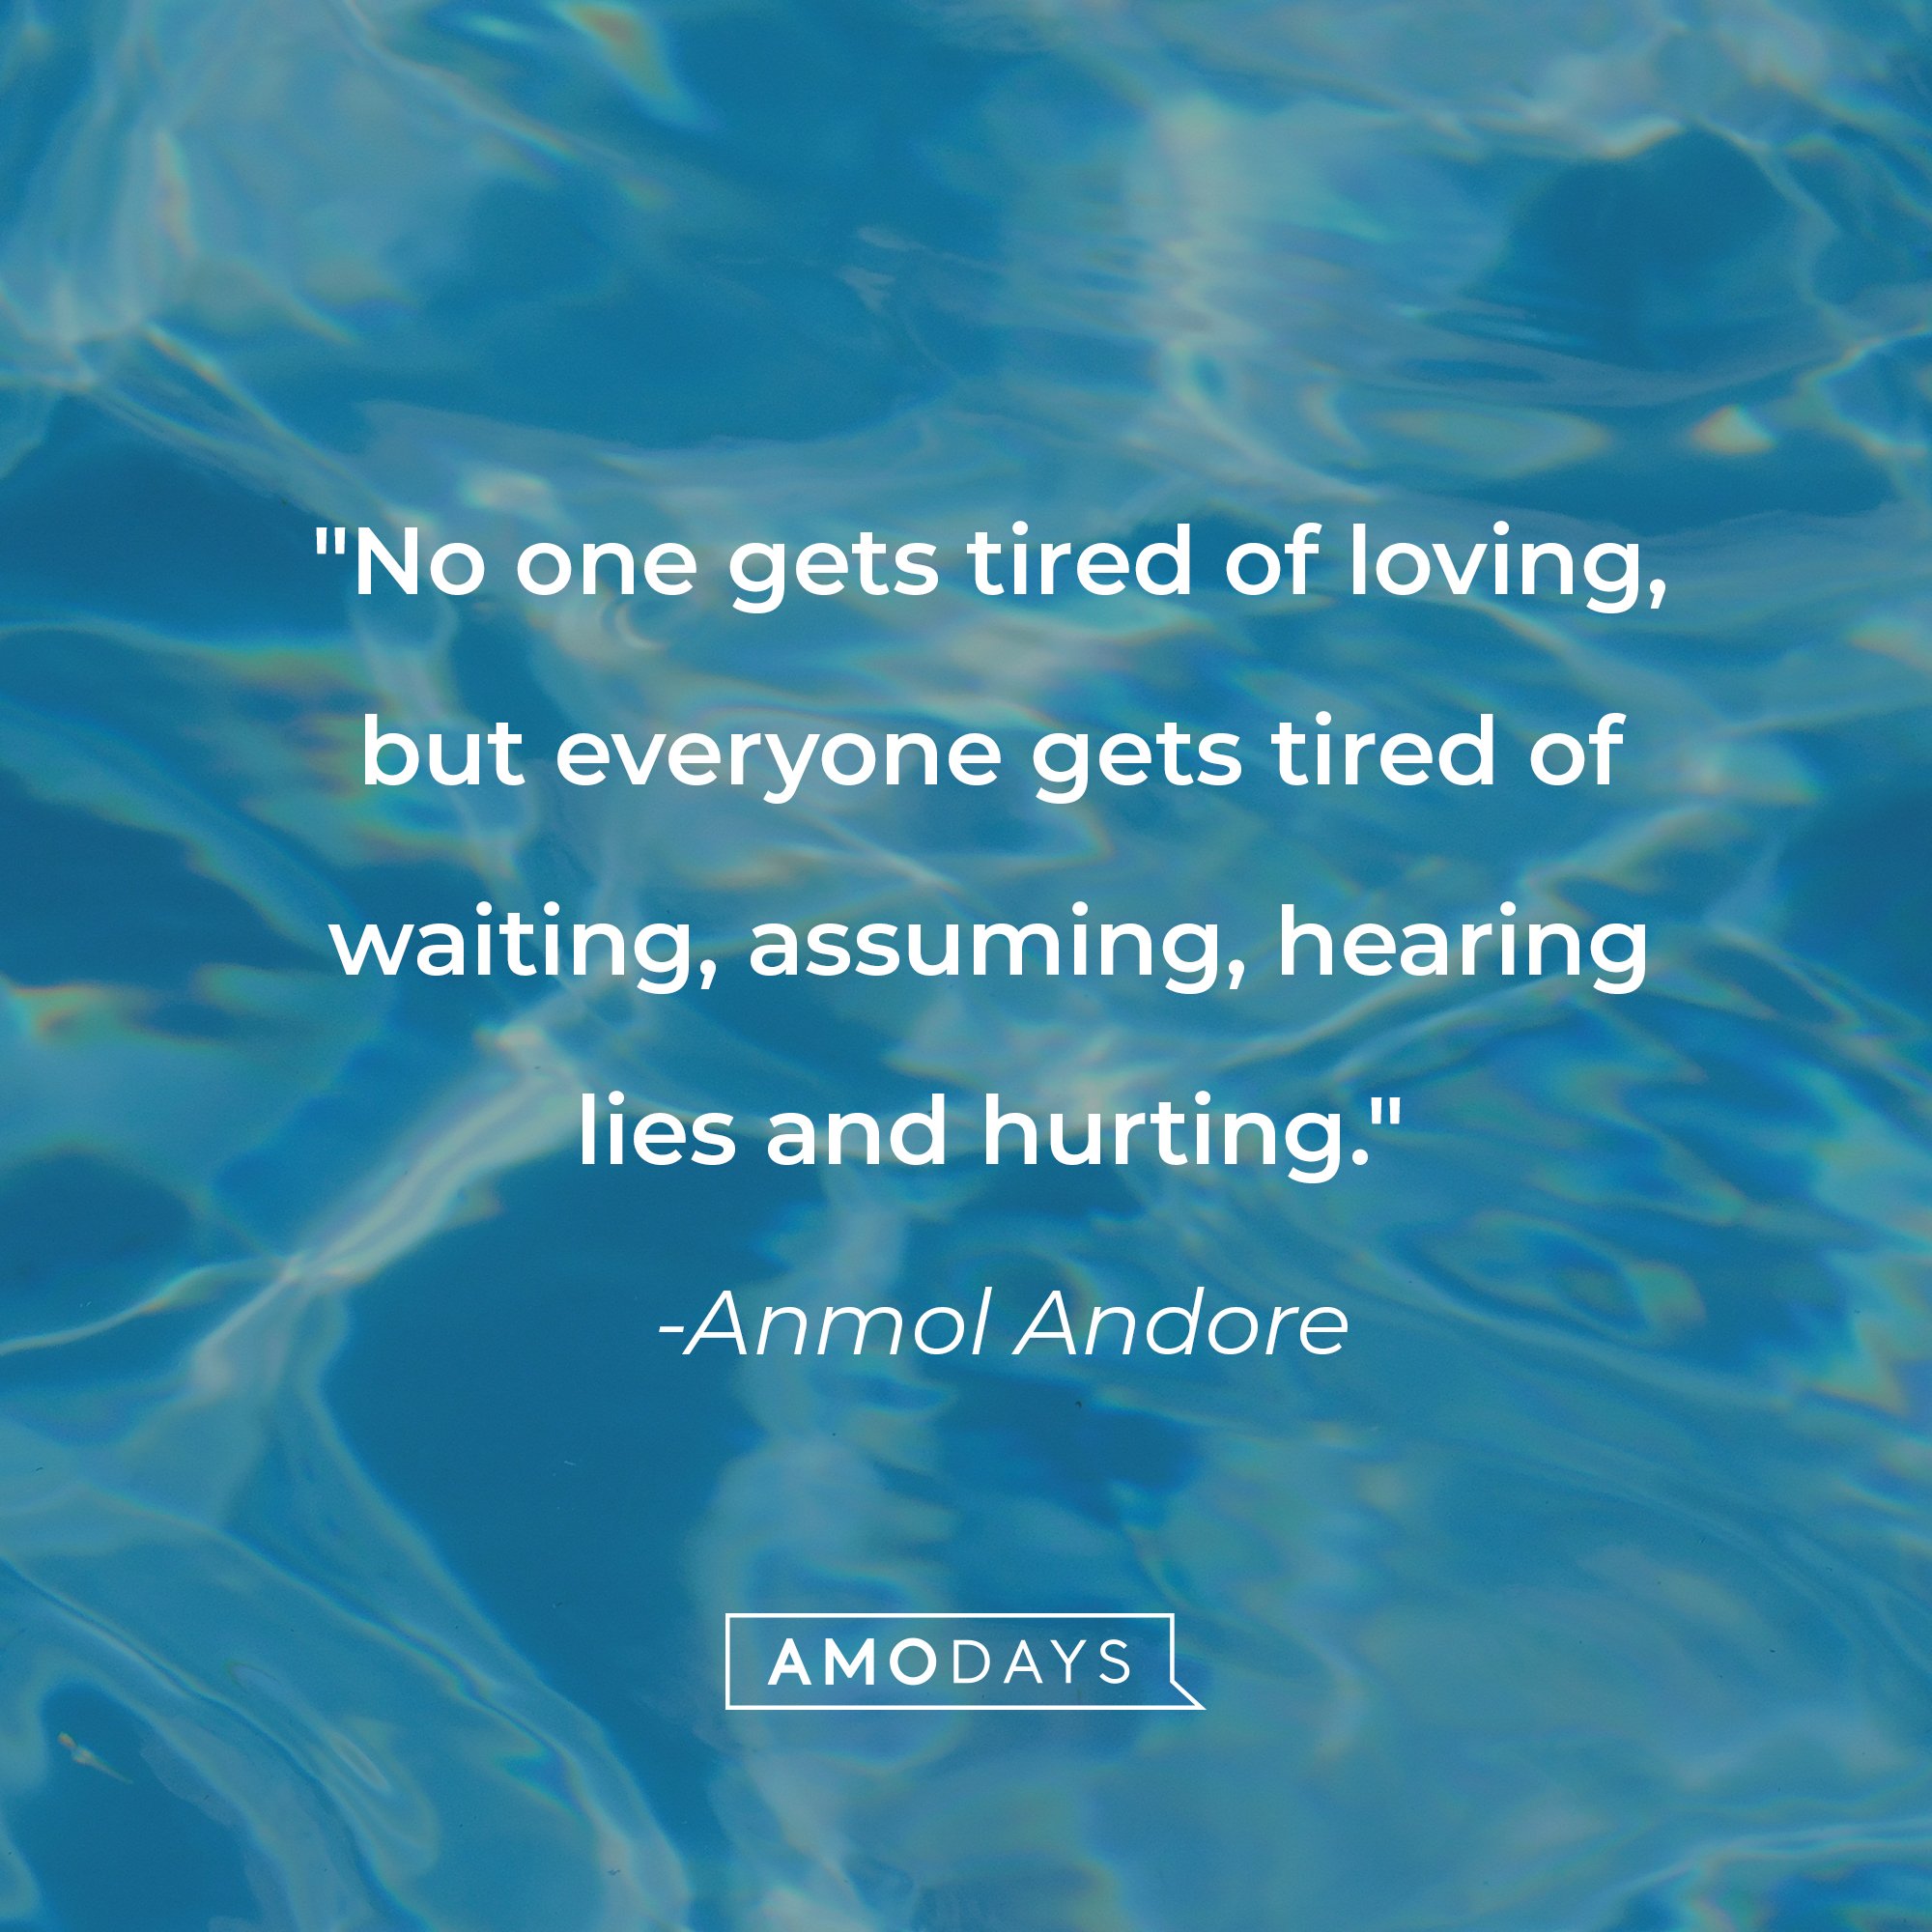 Anmol Andore's quote: "No one gets tired of loving, but everyone gets tired of waiting, assuming, hearing lies and hurting." | Source: AmoDays